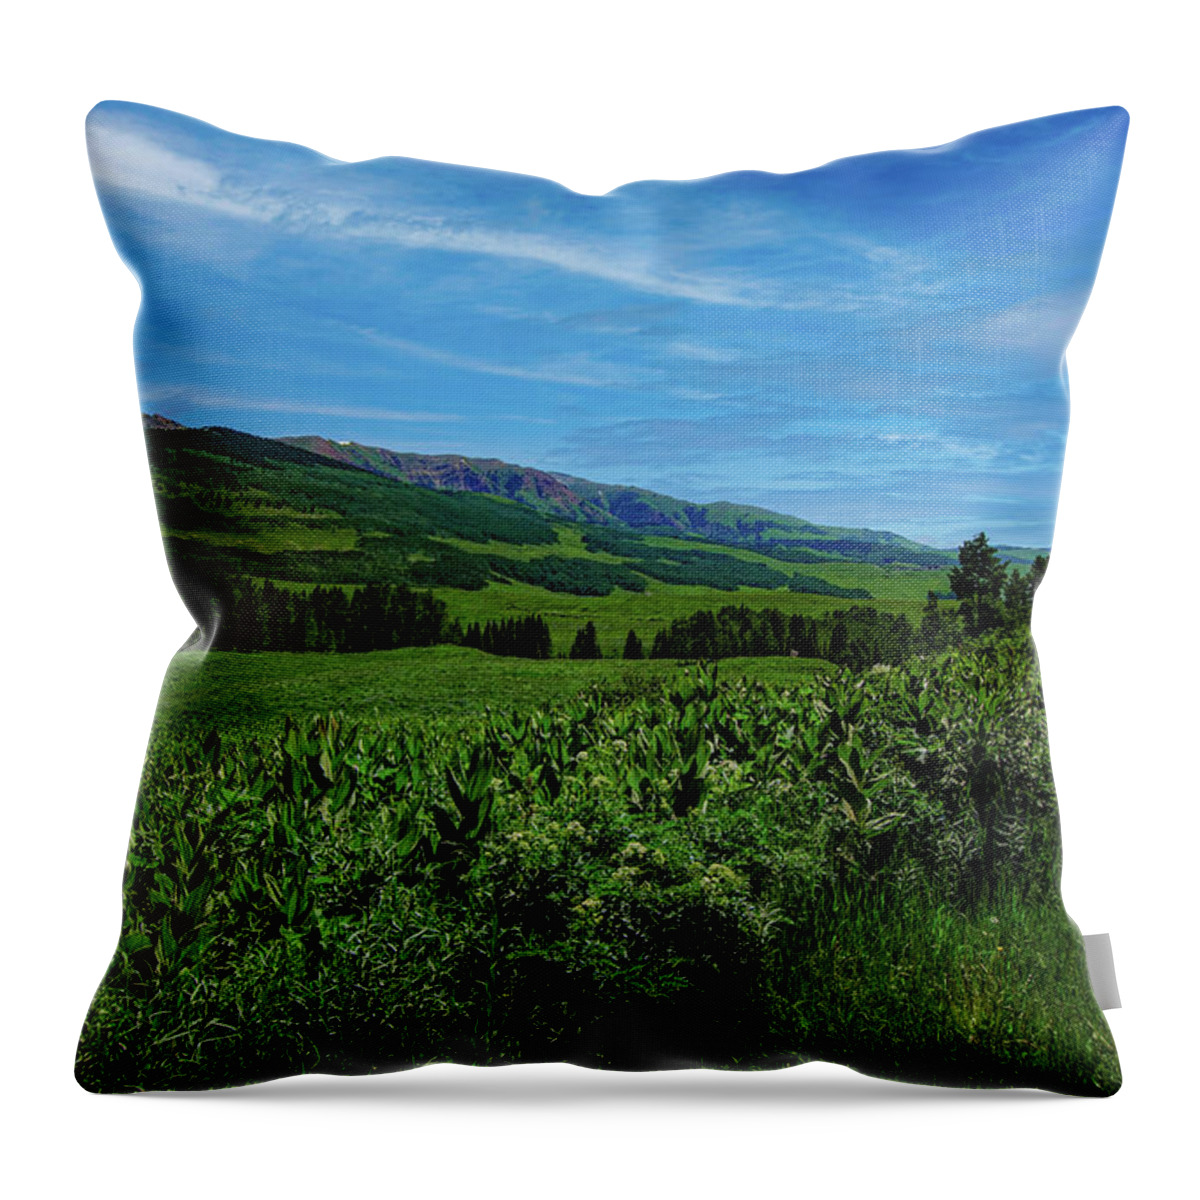 Cloud Throw Pillow featuring the photograph Crested Butte Colorado, Gothic Mountain by Tom Potter